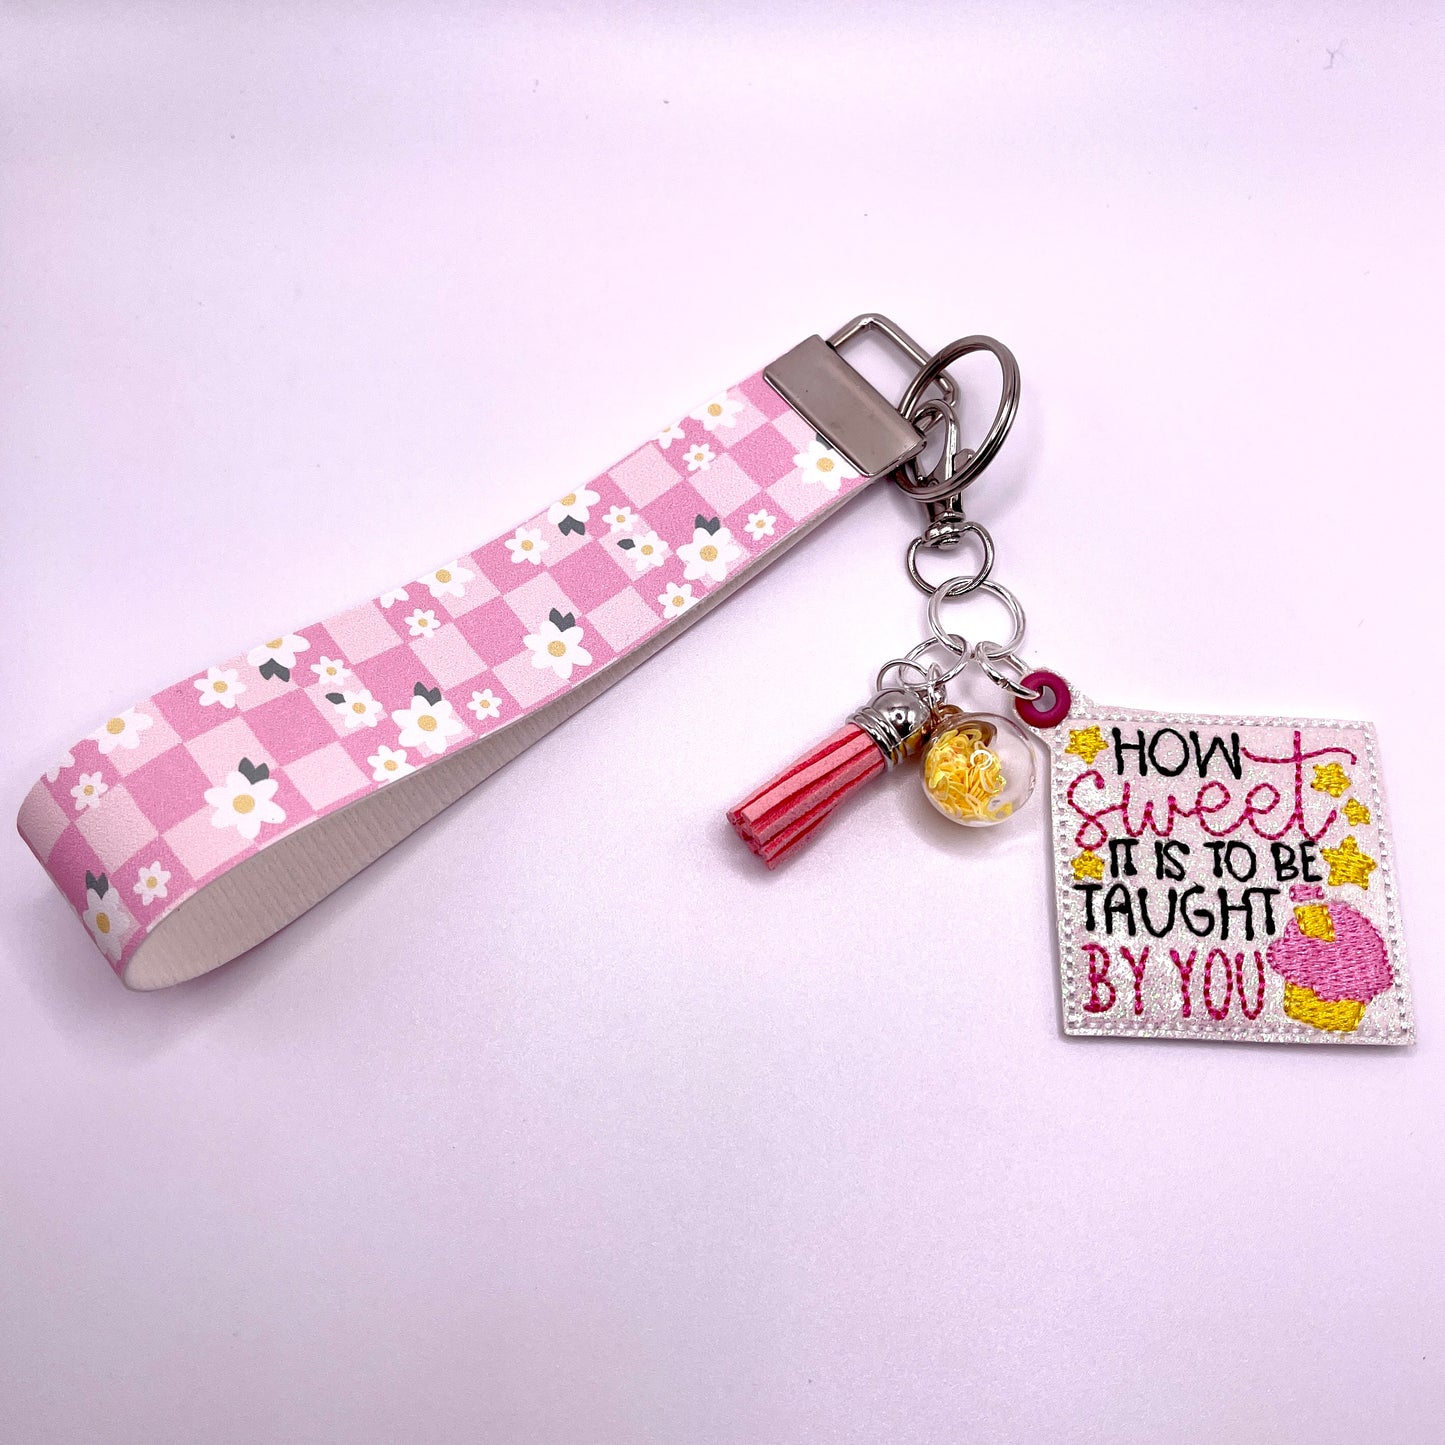 How Sweet Is To Be Taught By You Keychain and Wristlet